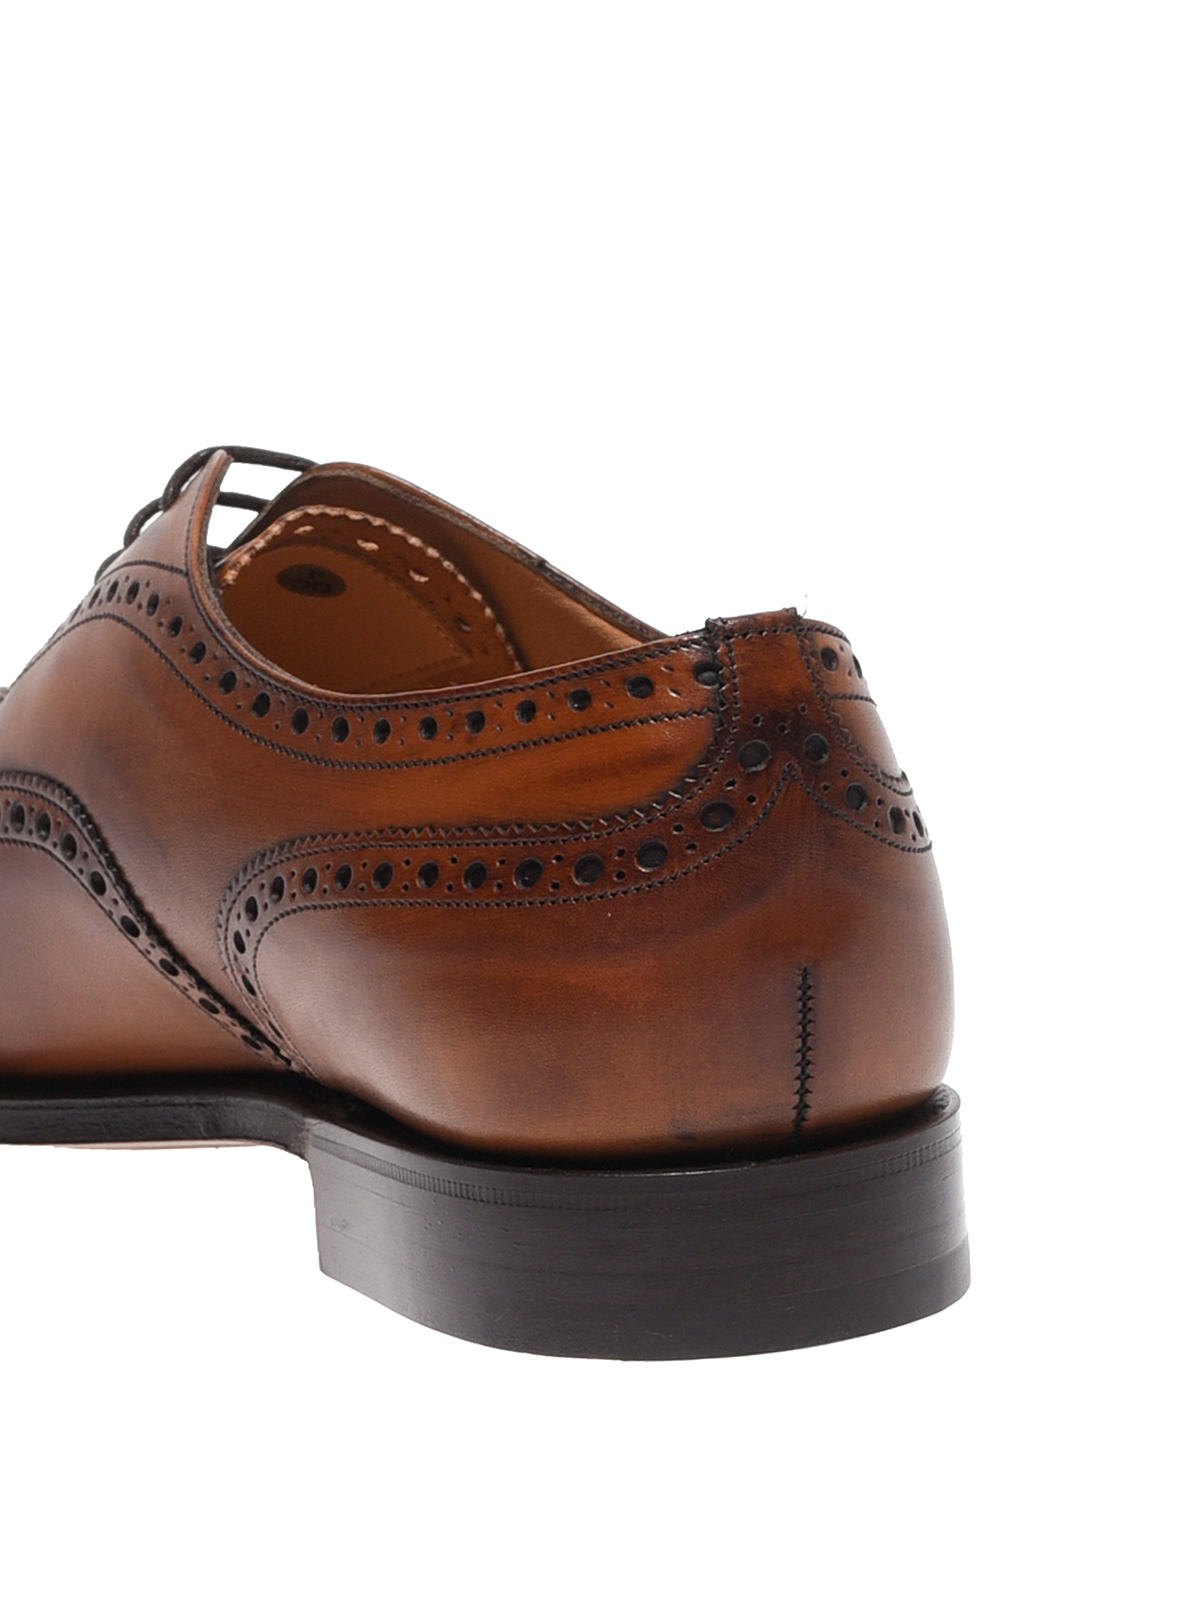 Church s Diplomat 173 Oxford shoes  in Nevada  leather 